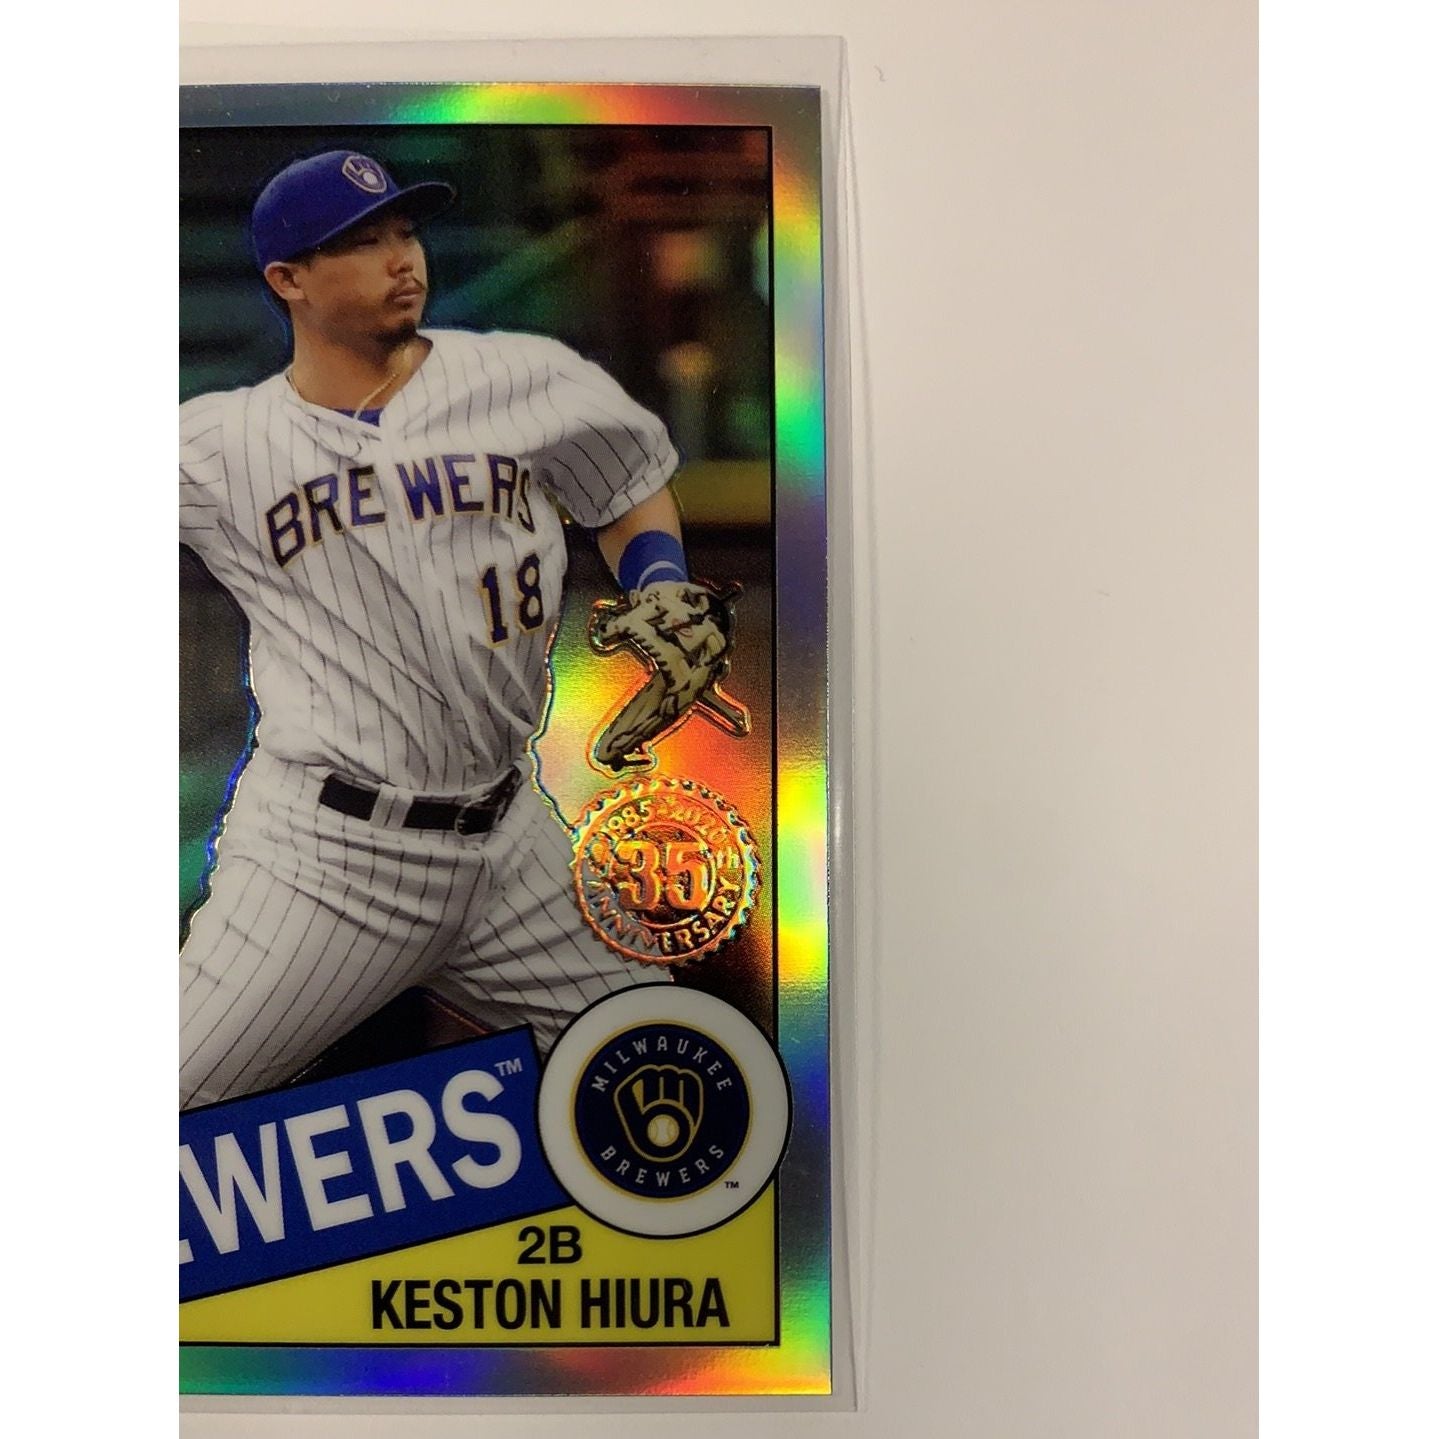  2020 Topps 35th Anniversary Keston Hiura Chrome Refractor  Local Legends Cards & Collectibles